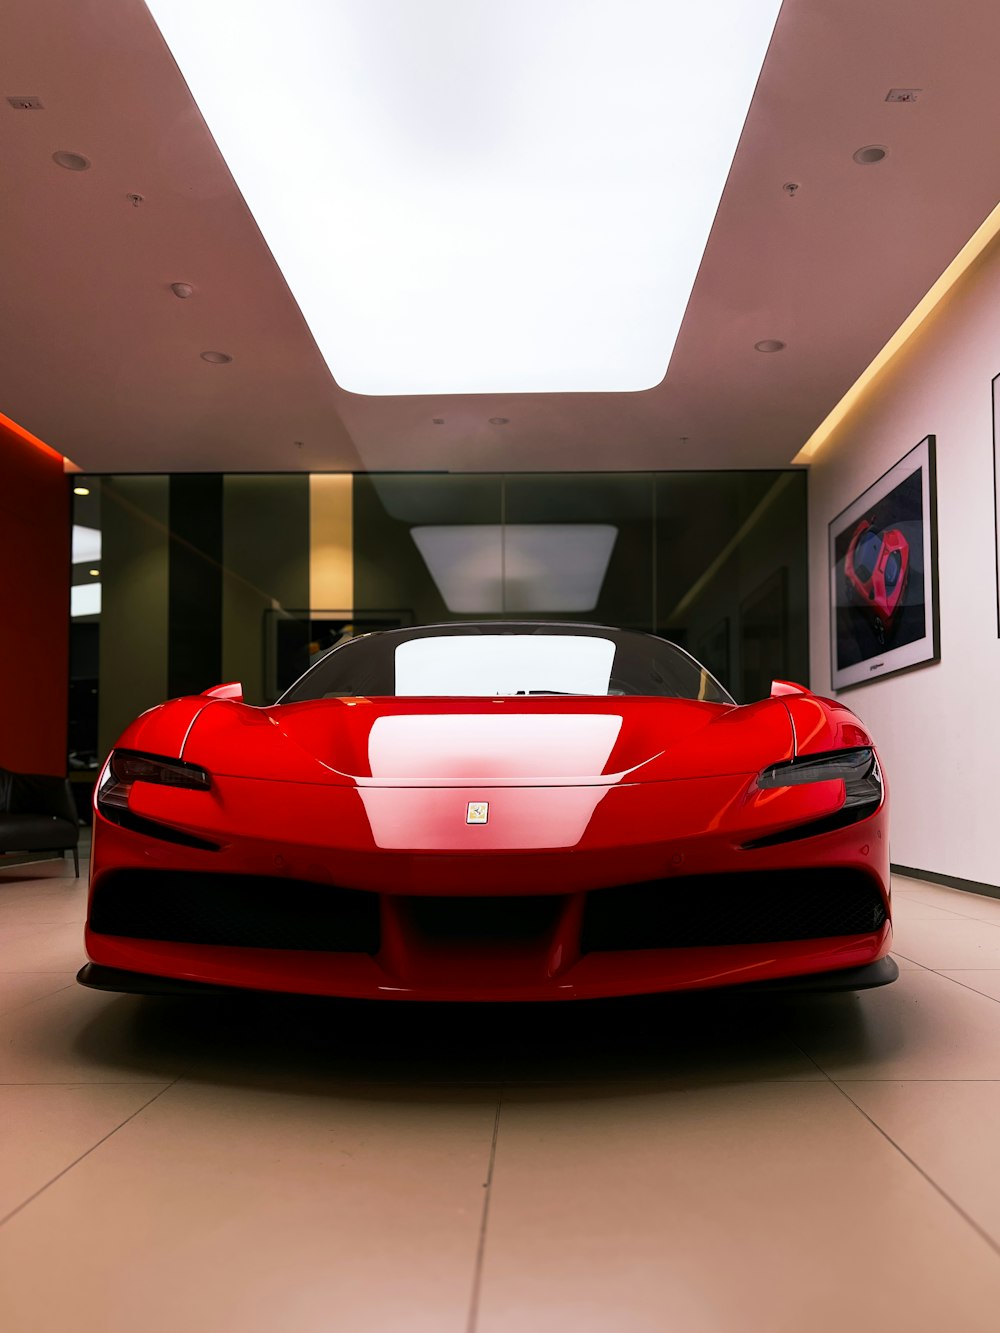 a red sports car is parked in a room